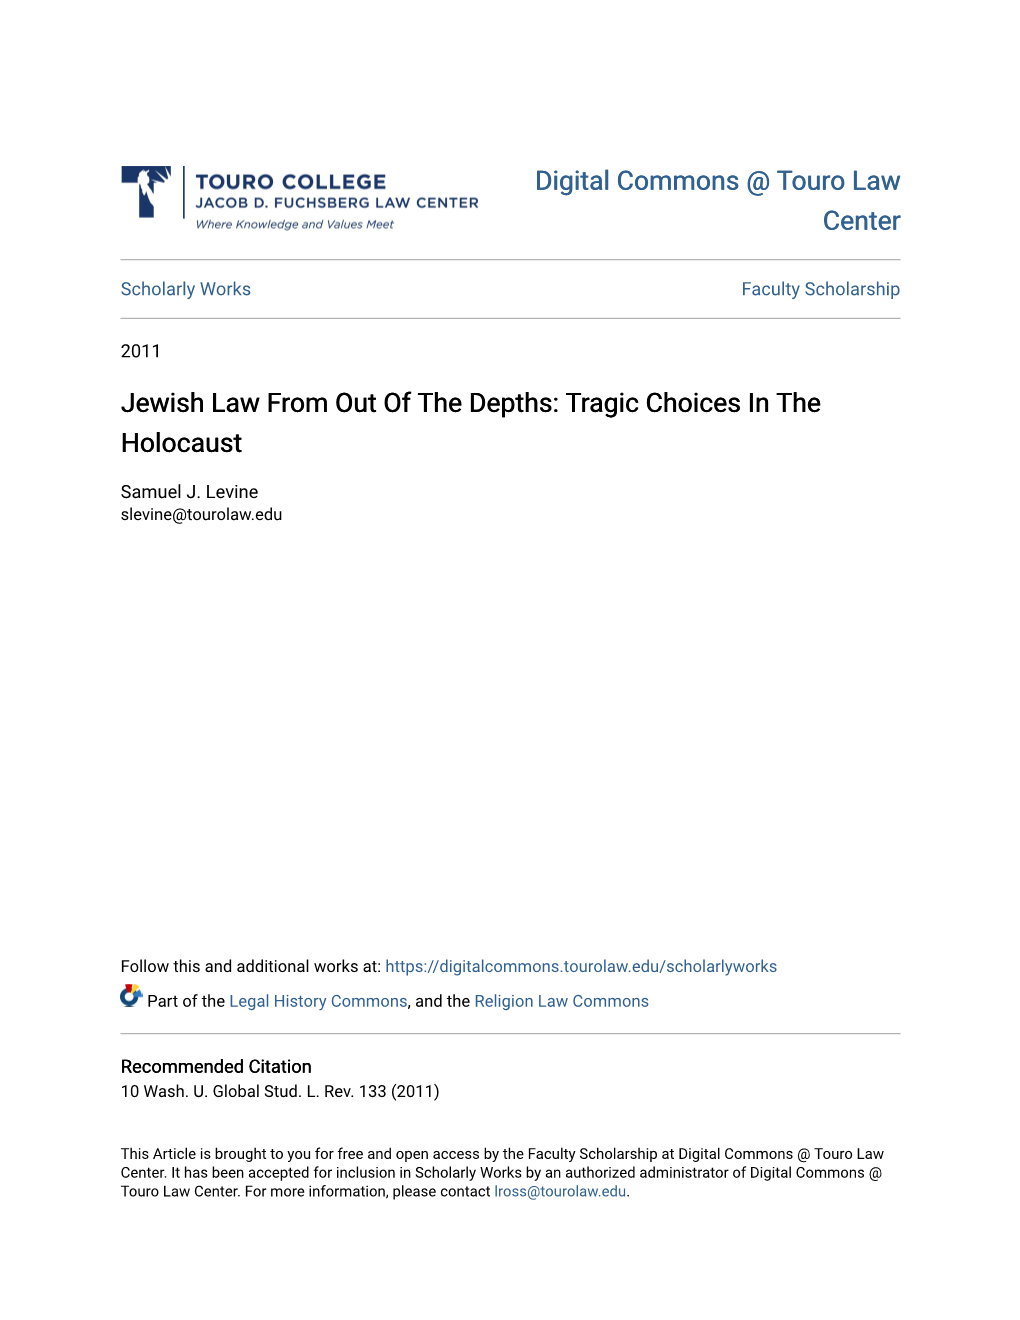 Jewish Law from out of the Depths: Tragic Choices in the Holocaust